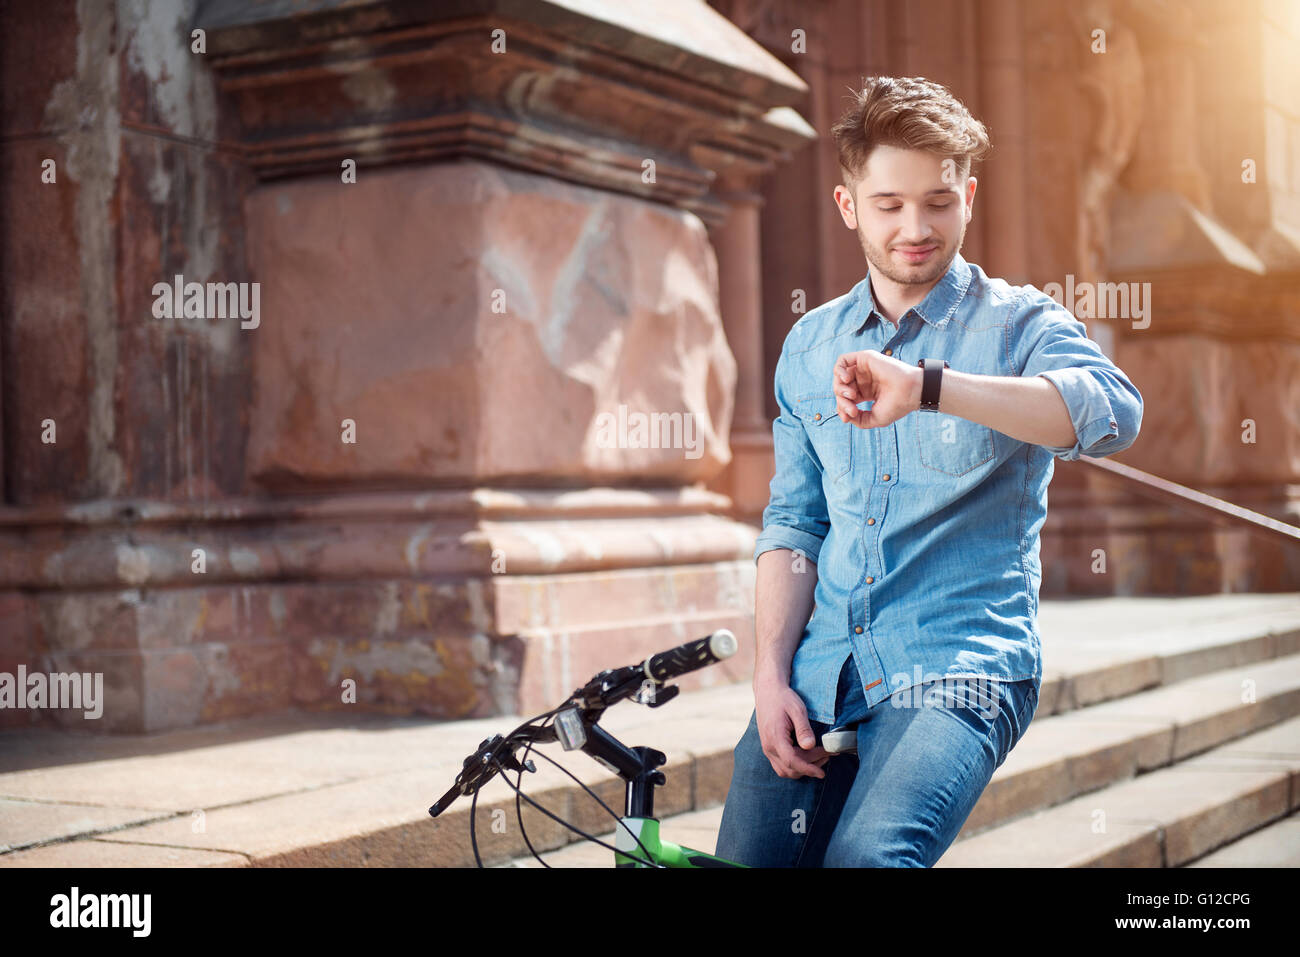 Positive guy sitting on the bicycle Stock Photo